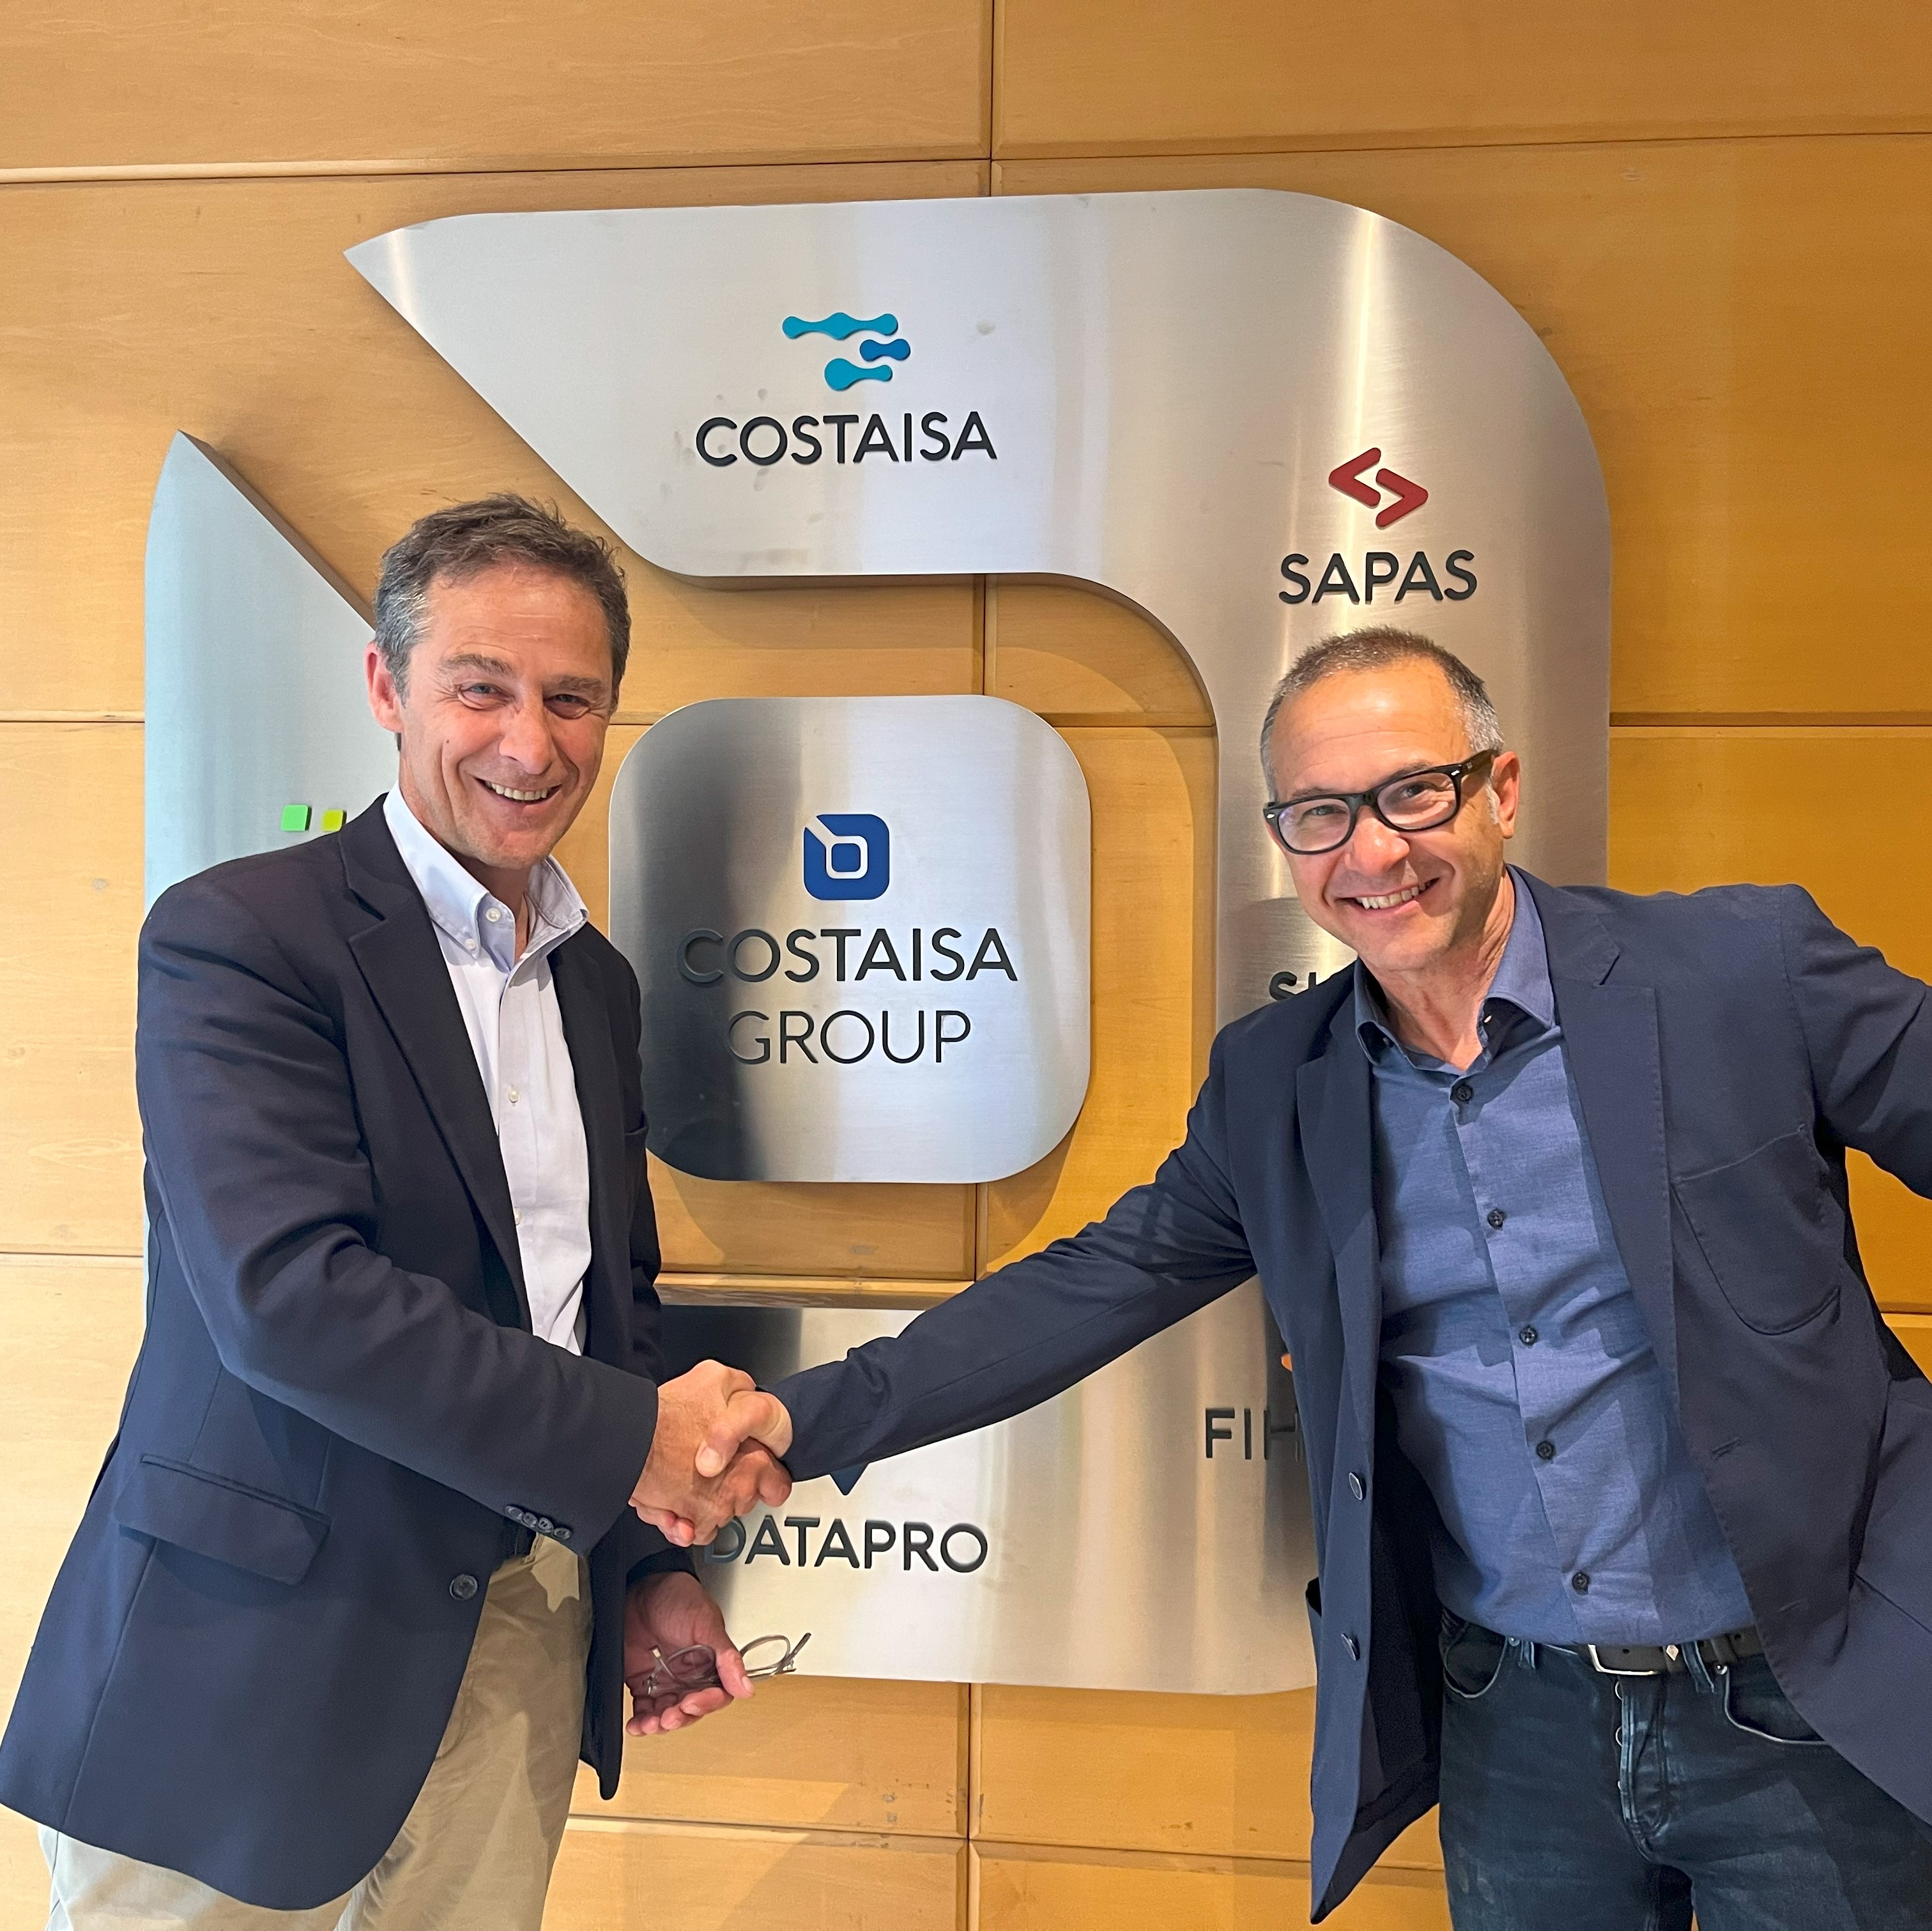 Davinci TI joins Costaisa Group to reinforce its commitment to the development of secure digital cloud platforms